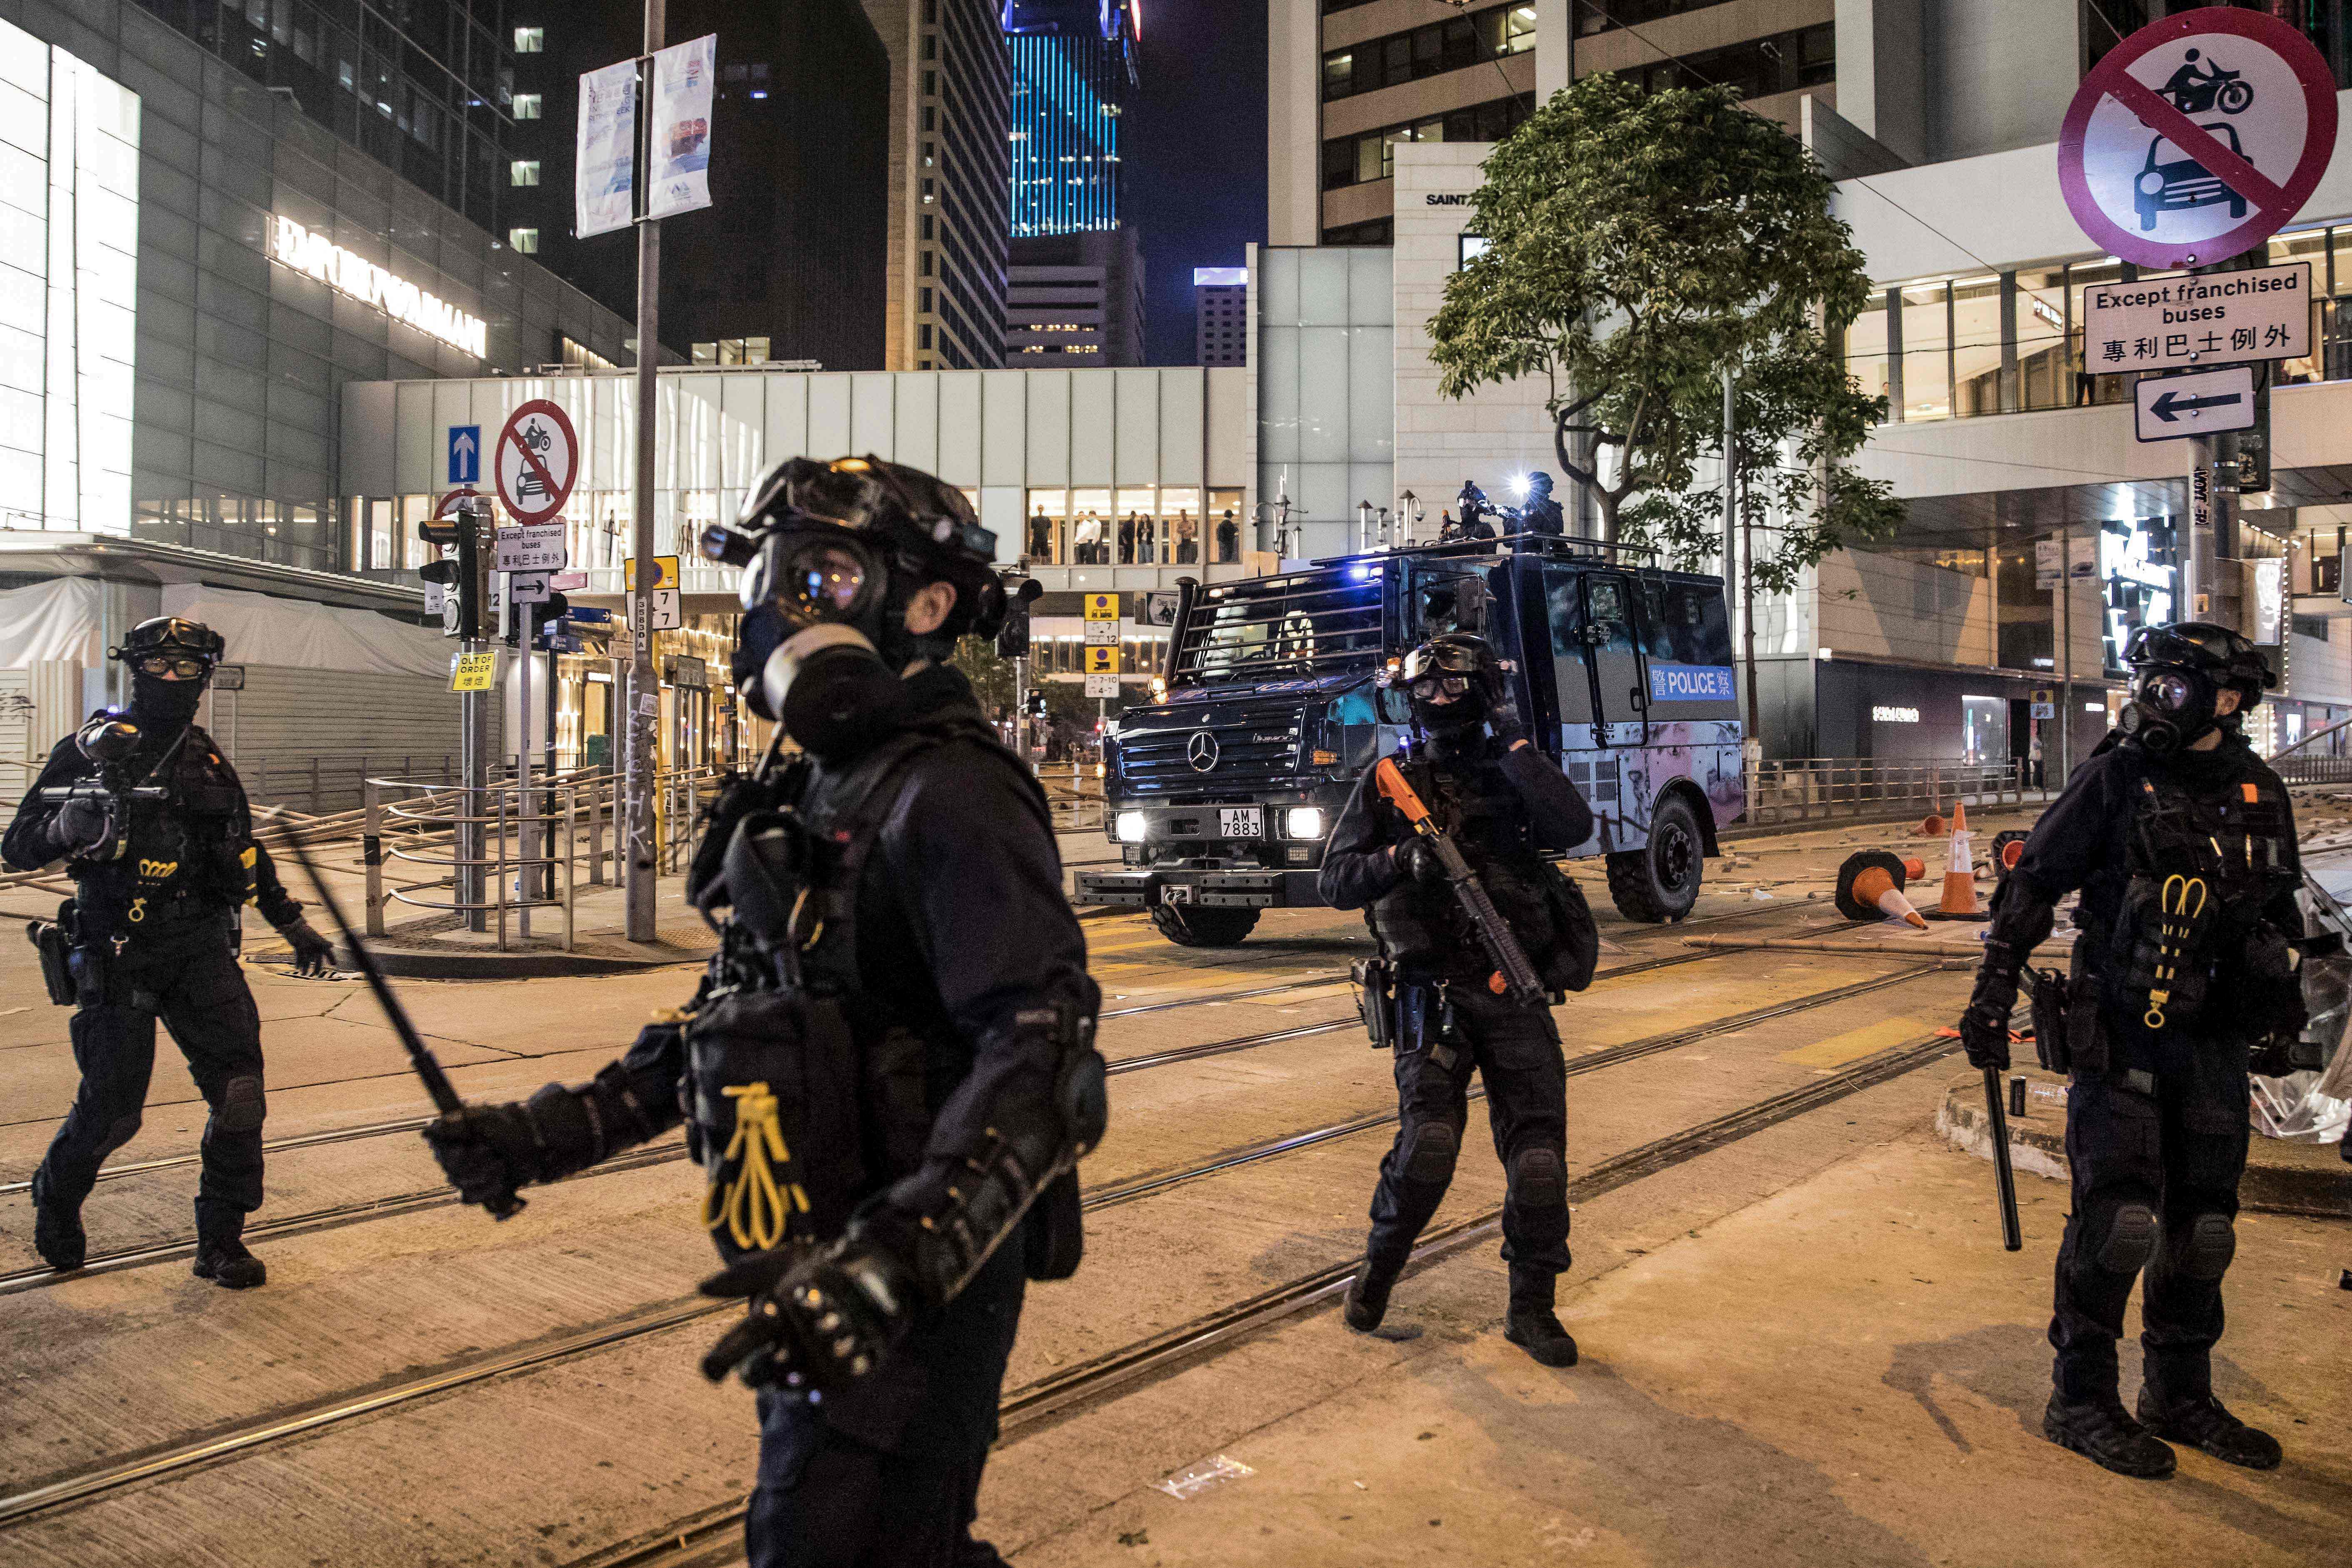 Riot police secure a road after clearing protesters in the Central district in Hong Kong on November 13, 2019. (AFP Photo)